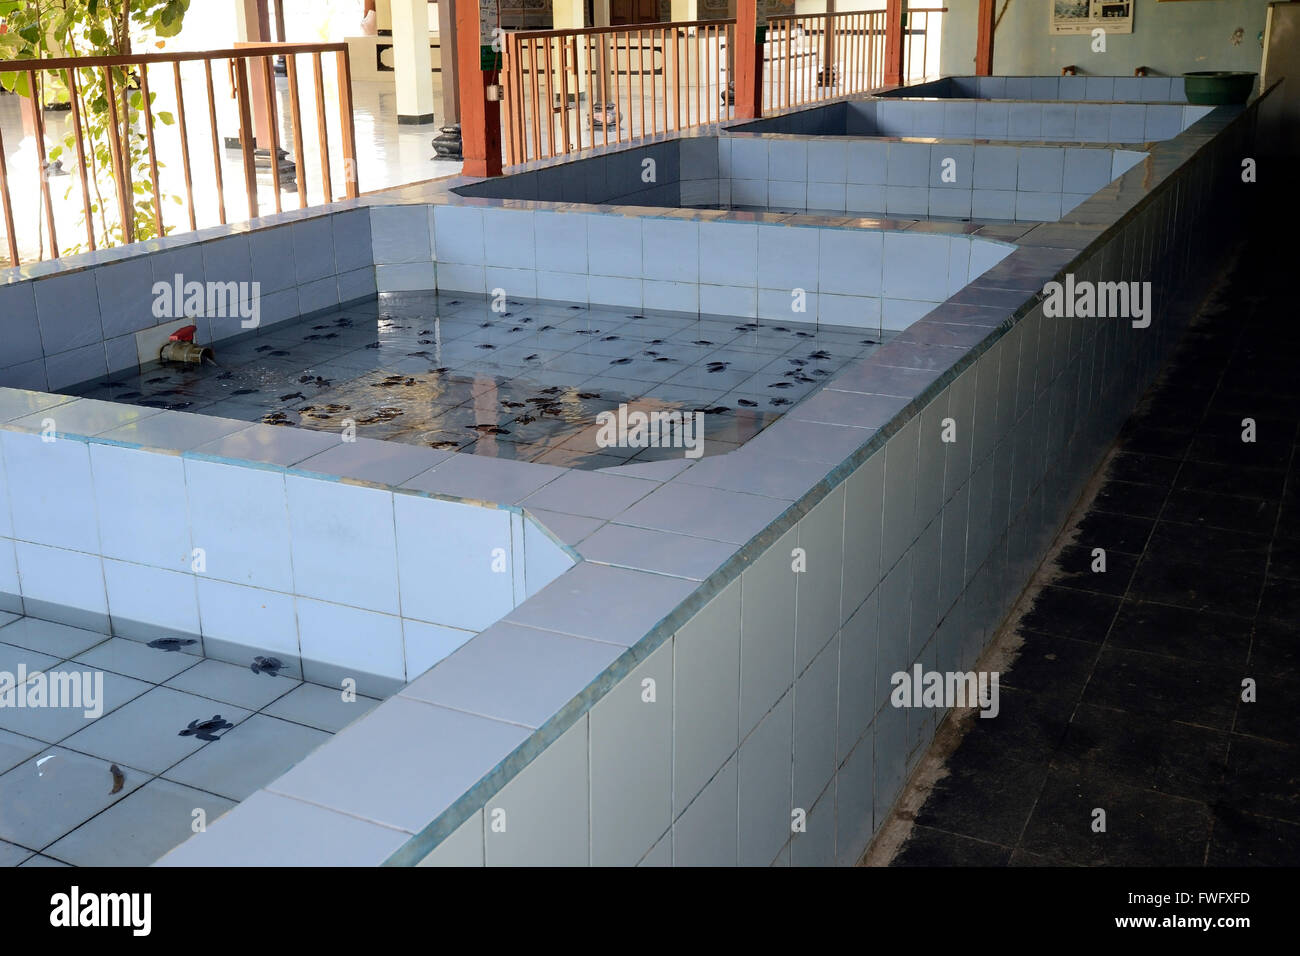 Basin for incubated seaturtles, rearing centre, Bali, Indonesia Stock Photo